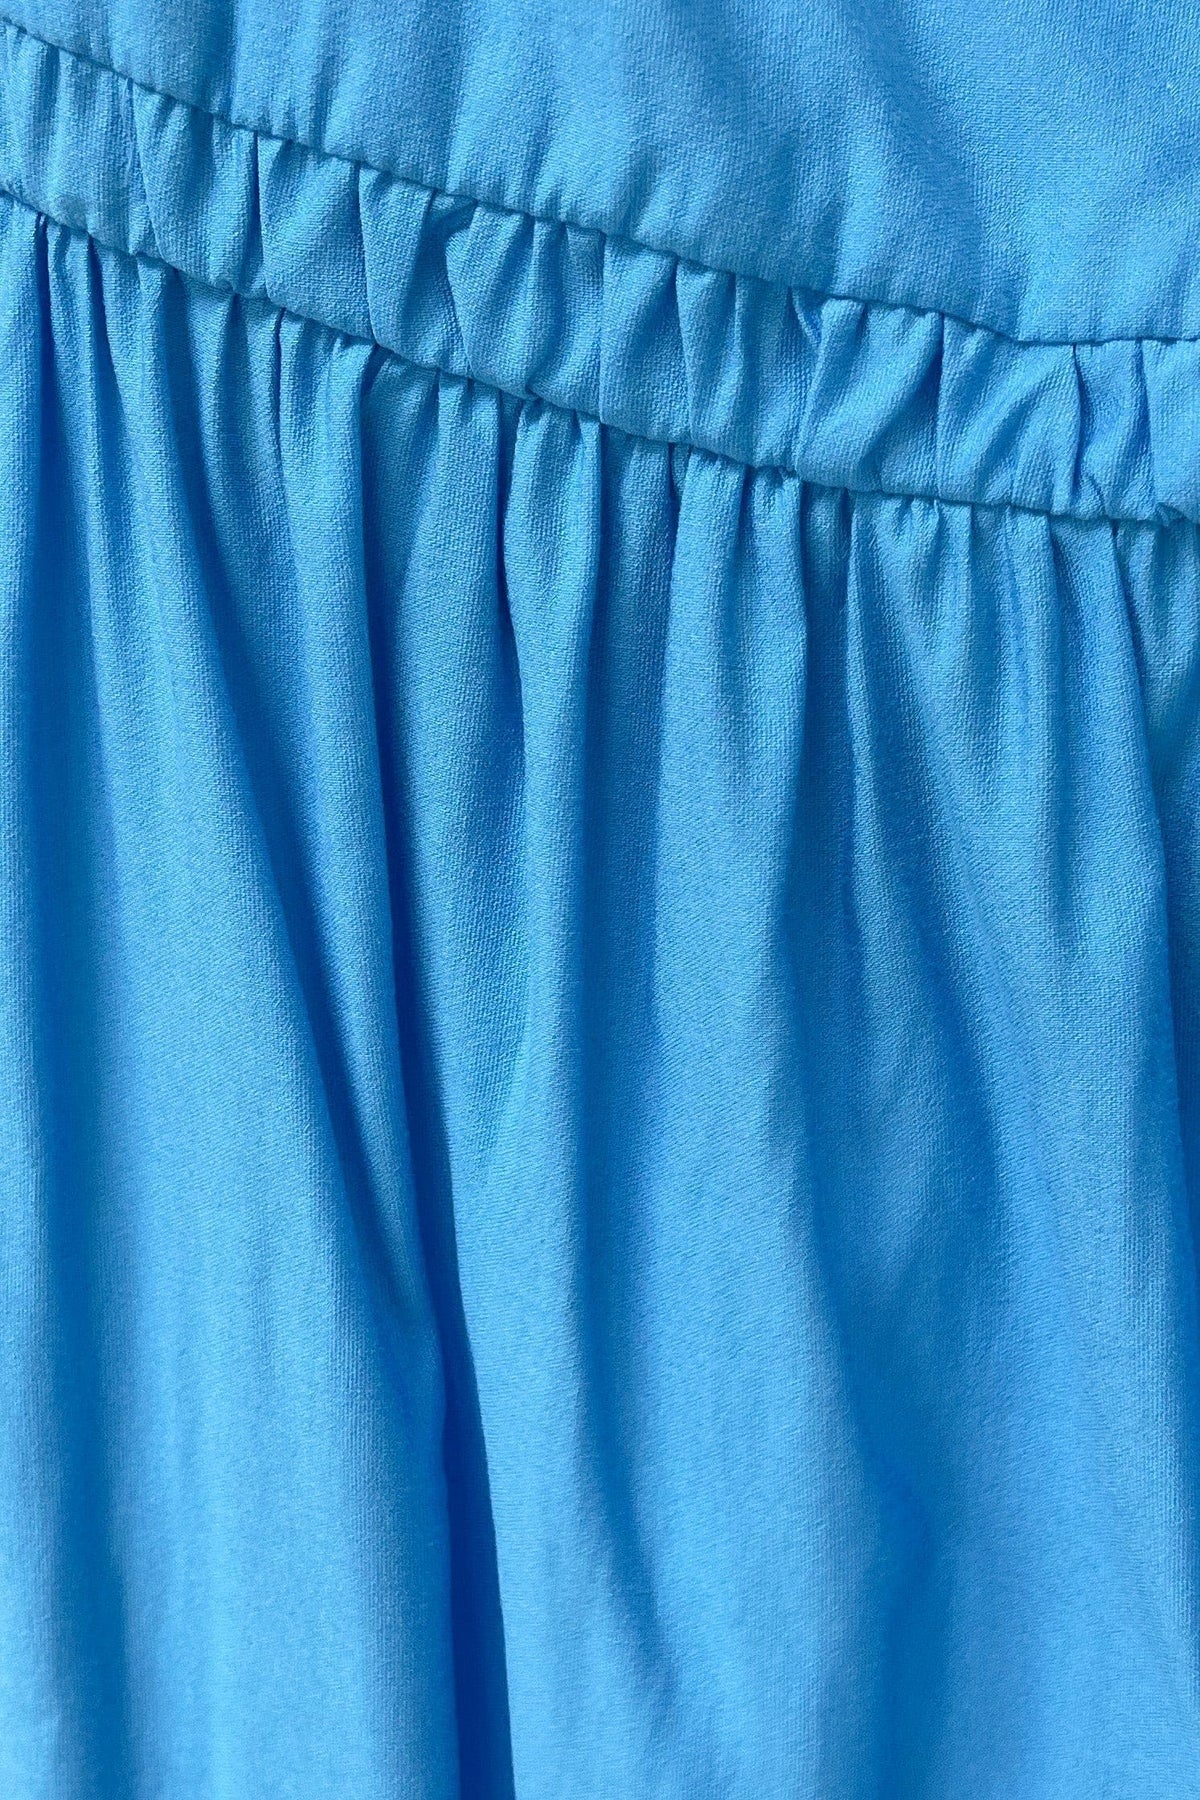 Olita Skirt, BLUE, BOTTOMS, MIDI SKIRT, new arrivals, POLYESTER &amp; RAYON, POLYESTER AND RAYON, RAYON AND POLYESTER, SKIRTS, , -MISHKAH